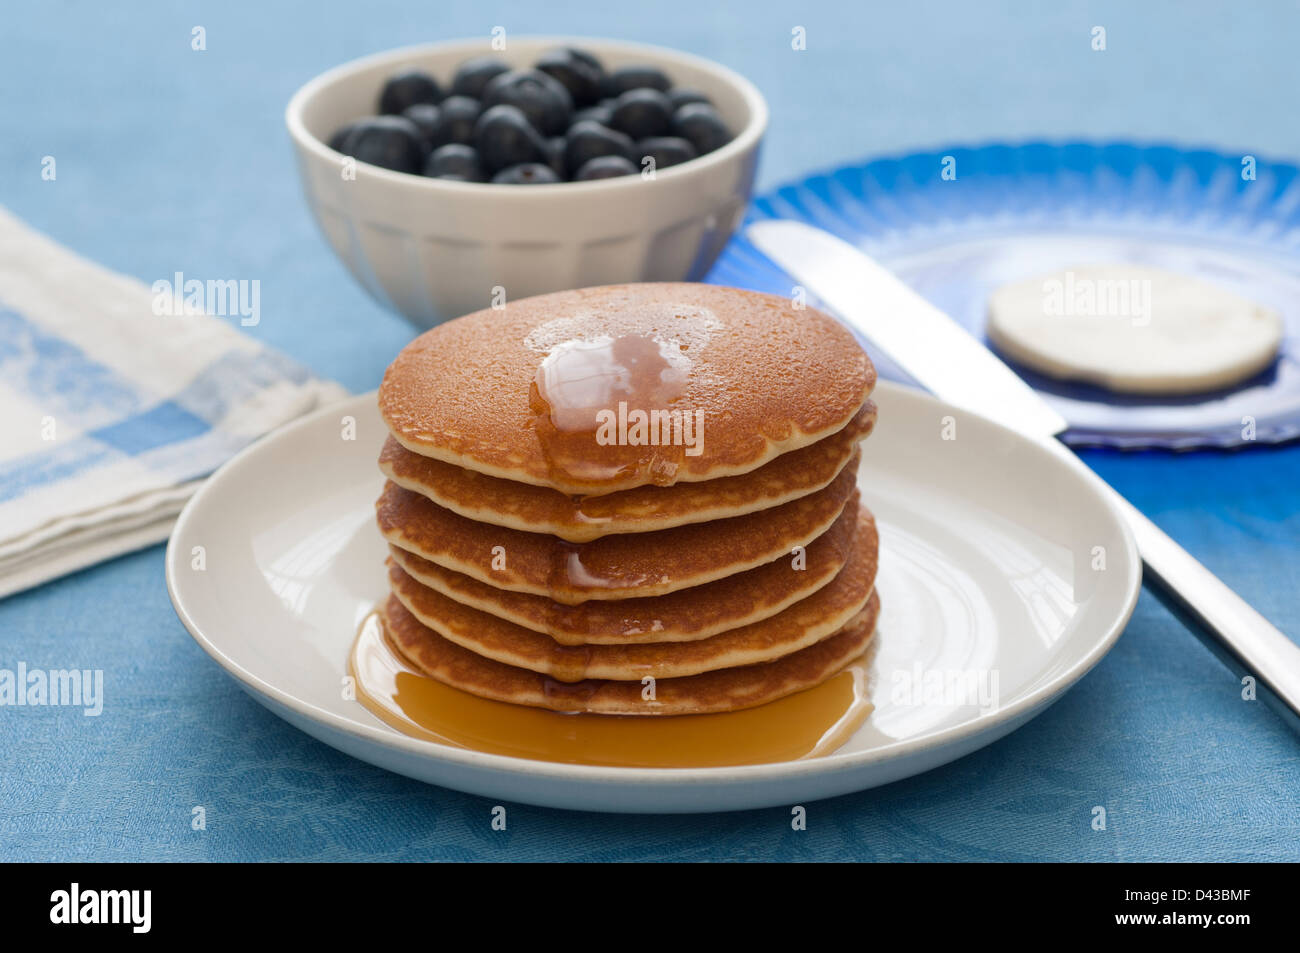 Close-up view of a stack of Pancakes with maple syrup. Butter and berries on the background. Stock Photo